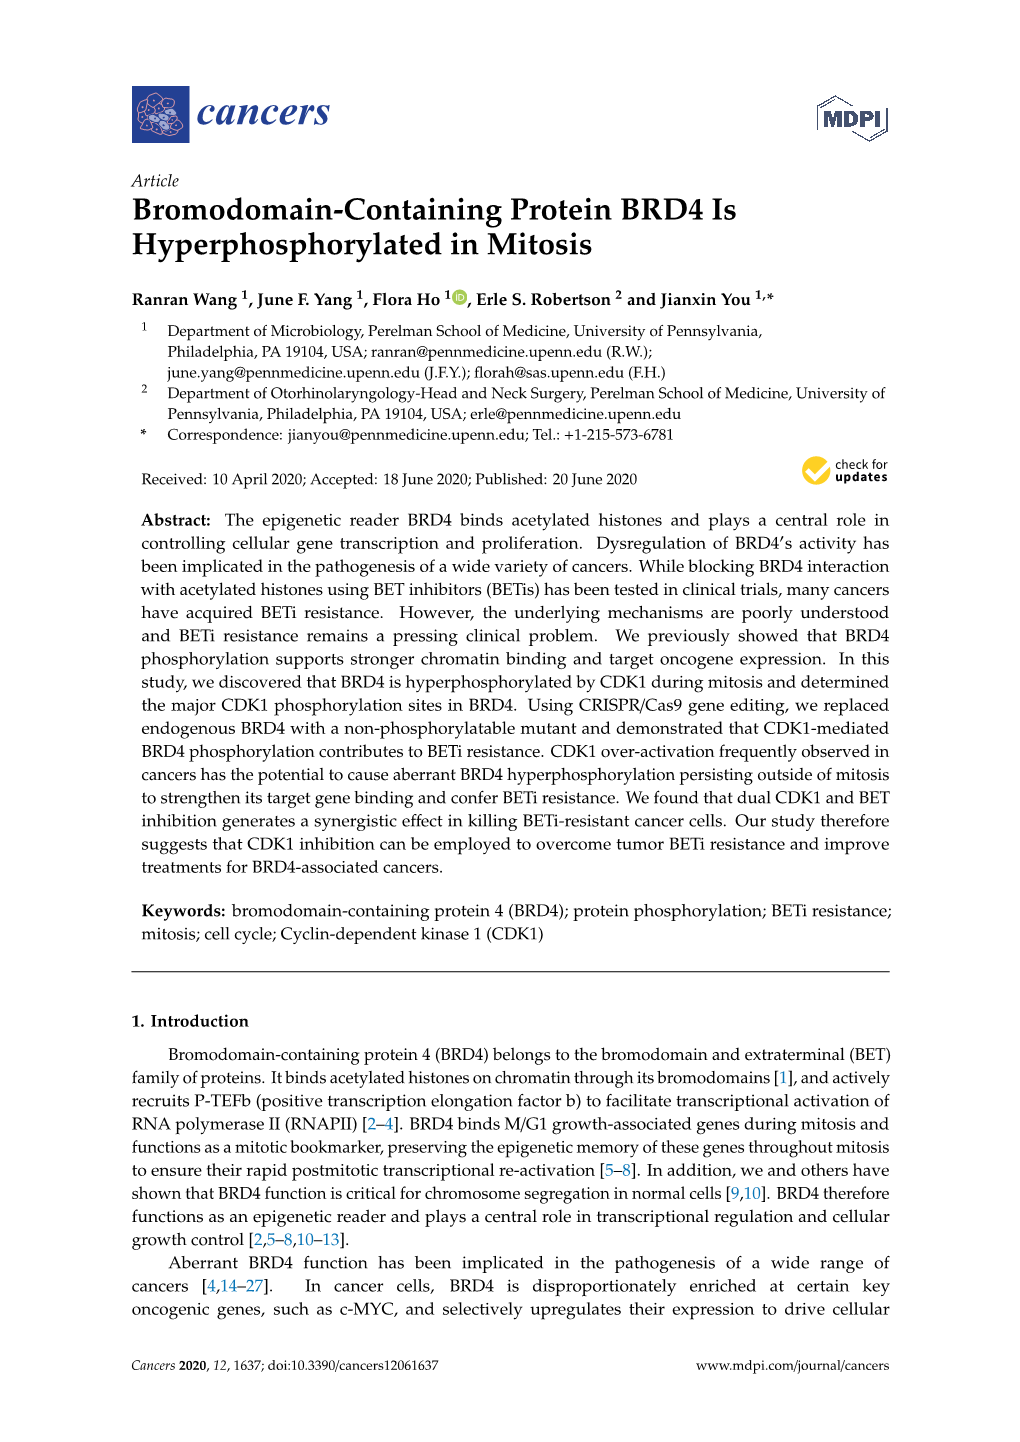 Bromodomain-Containing Protein BRD4 Is Hyperphosphorylated in Mitosis